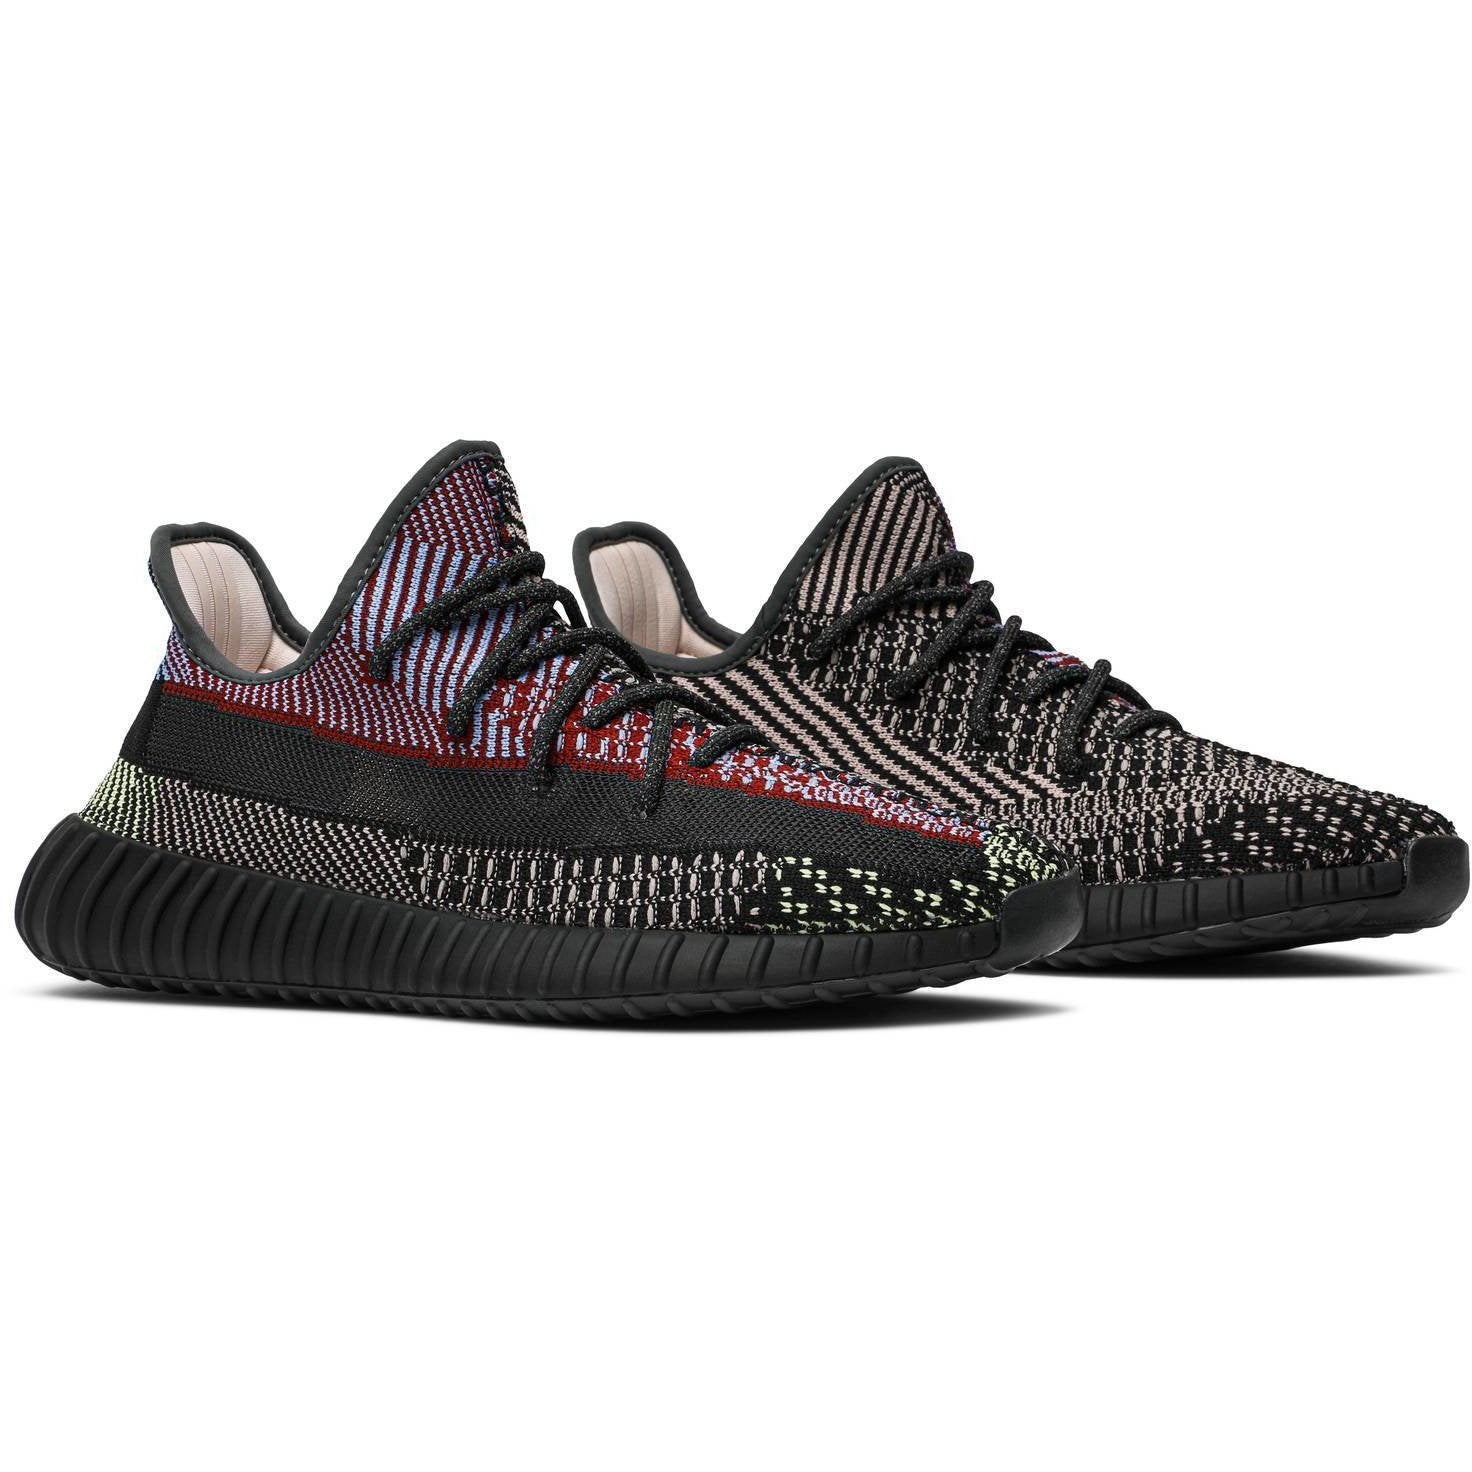 adidas Yeezy Boost 350 V2 'Yecheil Non-Reflective' - After Burn